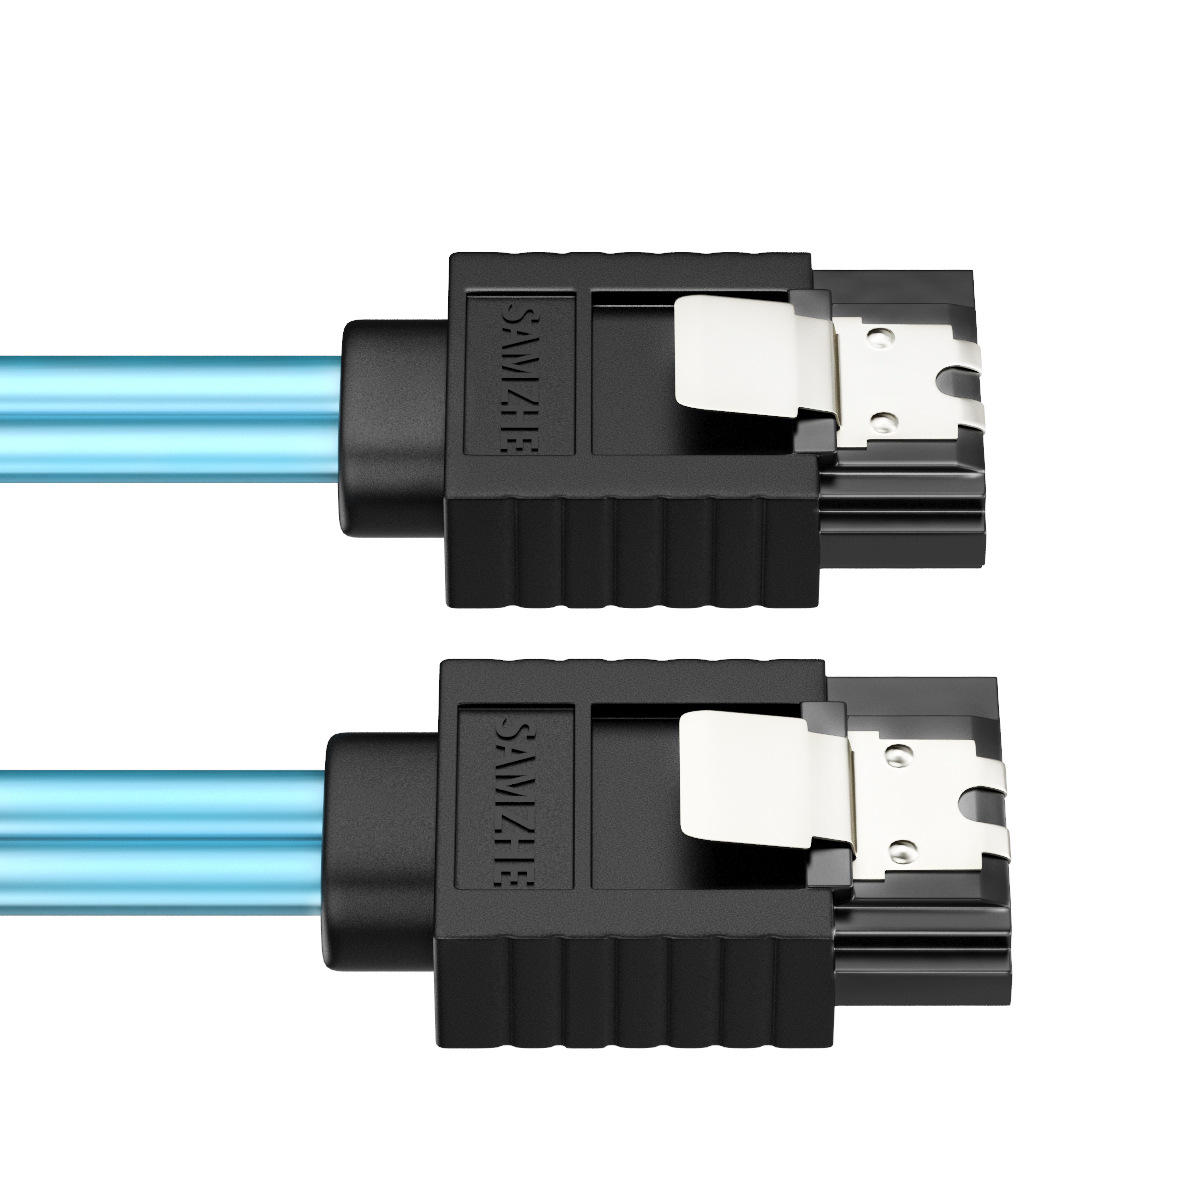 SAMZHE SATA III 6.0 Gbps Data Cable with Locking Latch SATA3 HDD Data Cable for SSD DVD PC Computer 